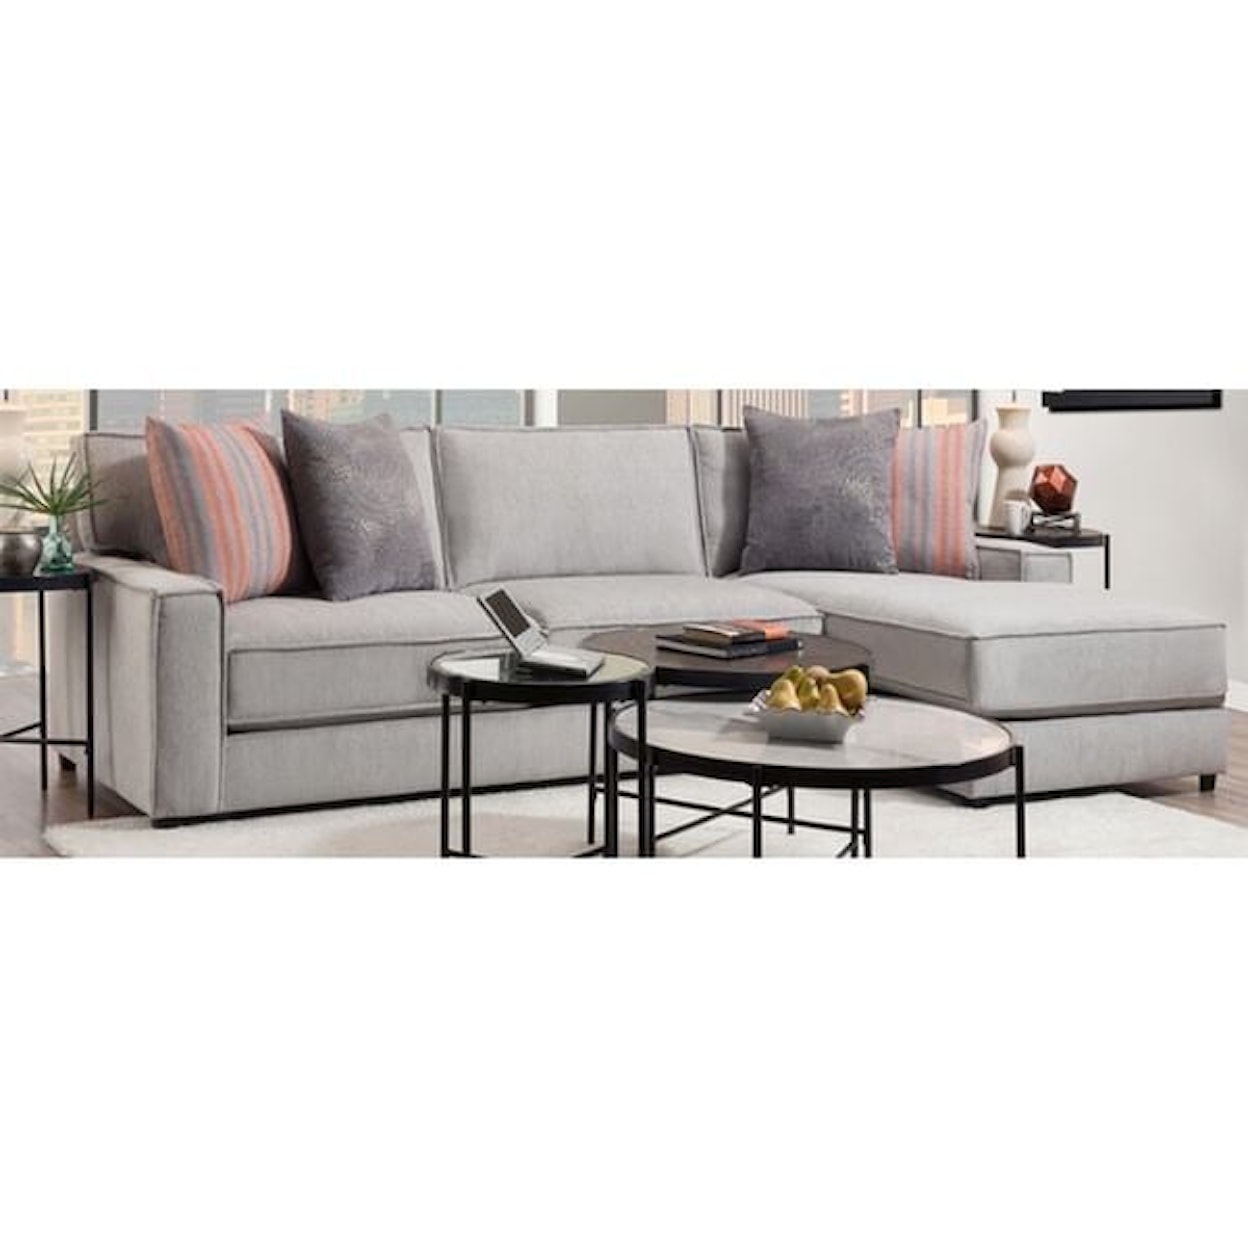 Elements International 572 Loveseat With Chaise